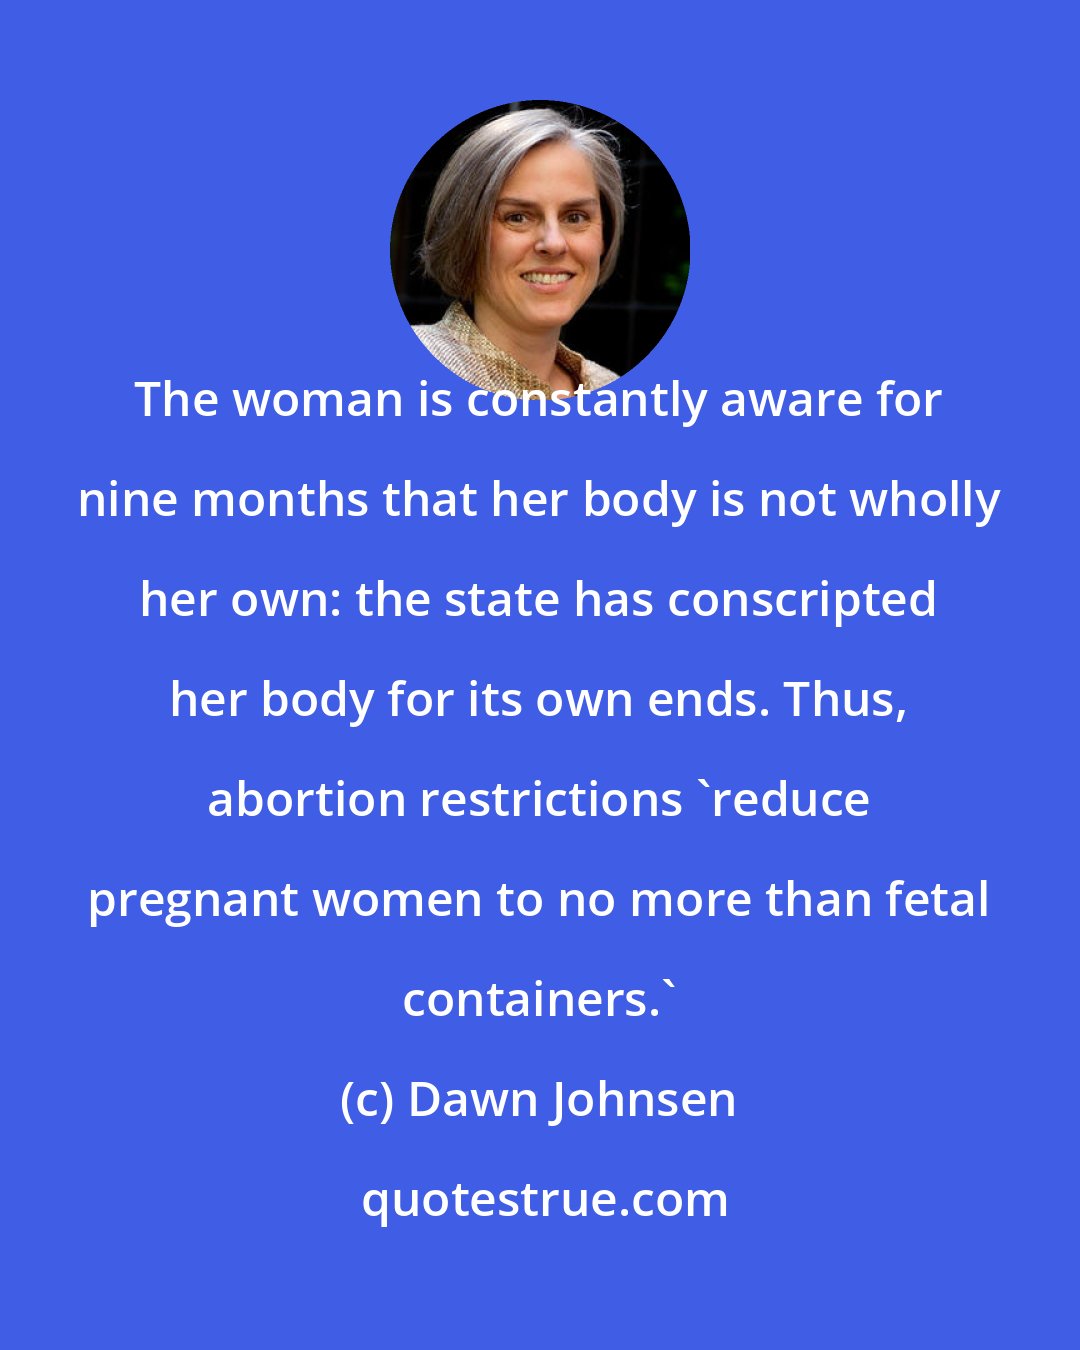 Dawn Johnsen: The woman is constantly aware for nine months that her body is not wholly her own: the state has conscripted her body for its own ends. Thus, abortion restrictions 'reduce pregnant women to no more than fetal containers.'